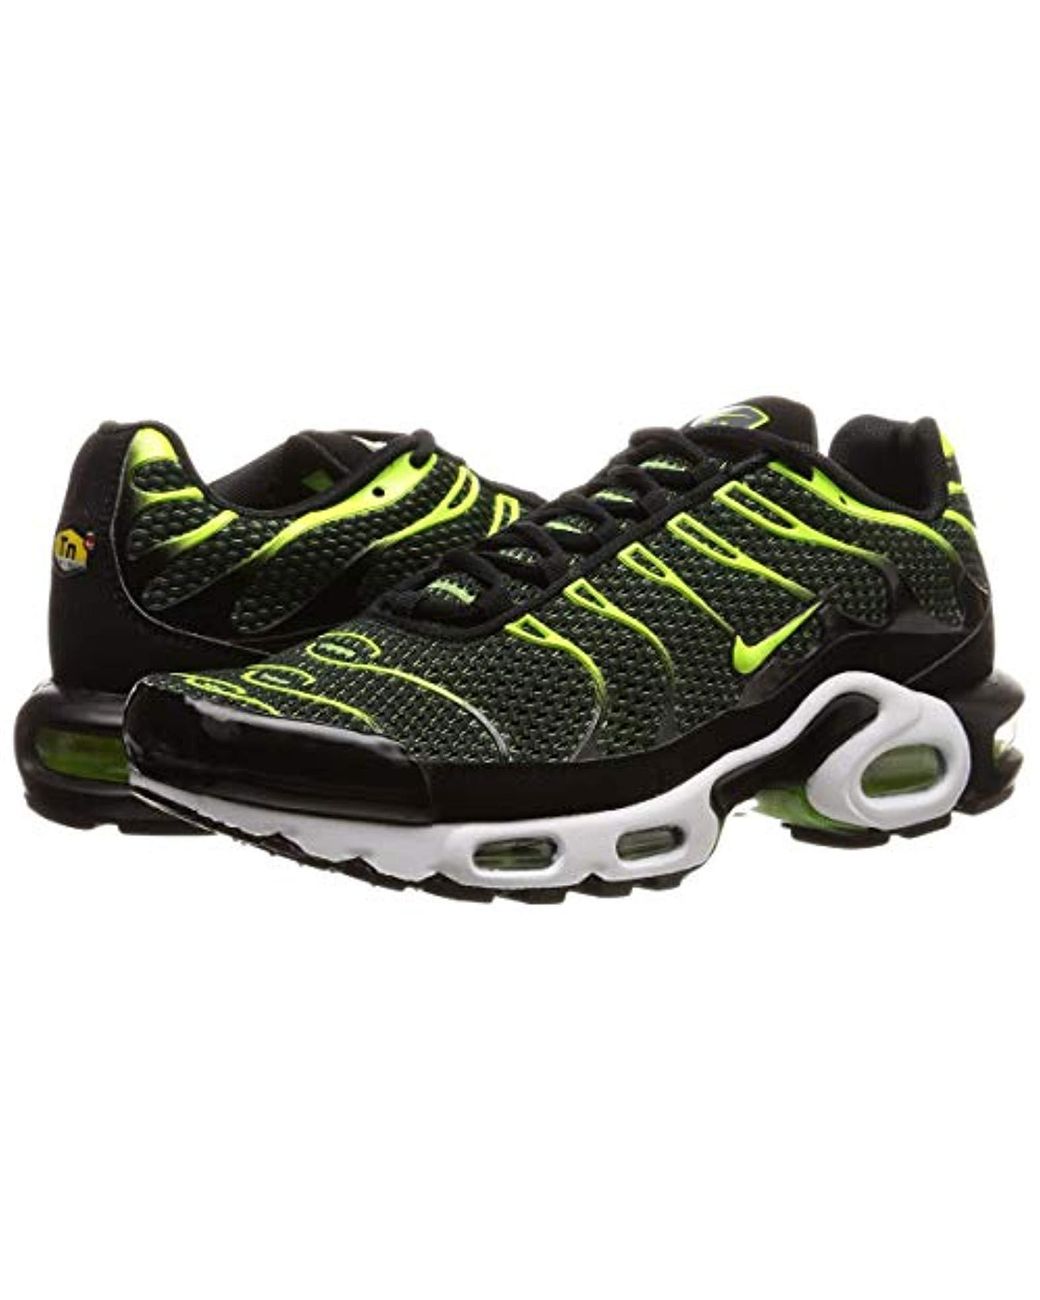 Nike Original Air Max Plus Tuned 1 Tn Black Volt Green Trainers Shoes  852630 036 for Men | Lyst UK